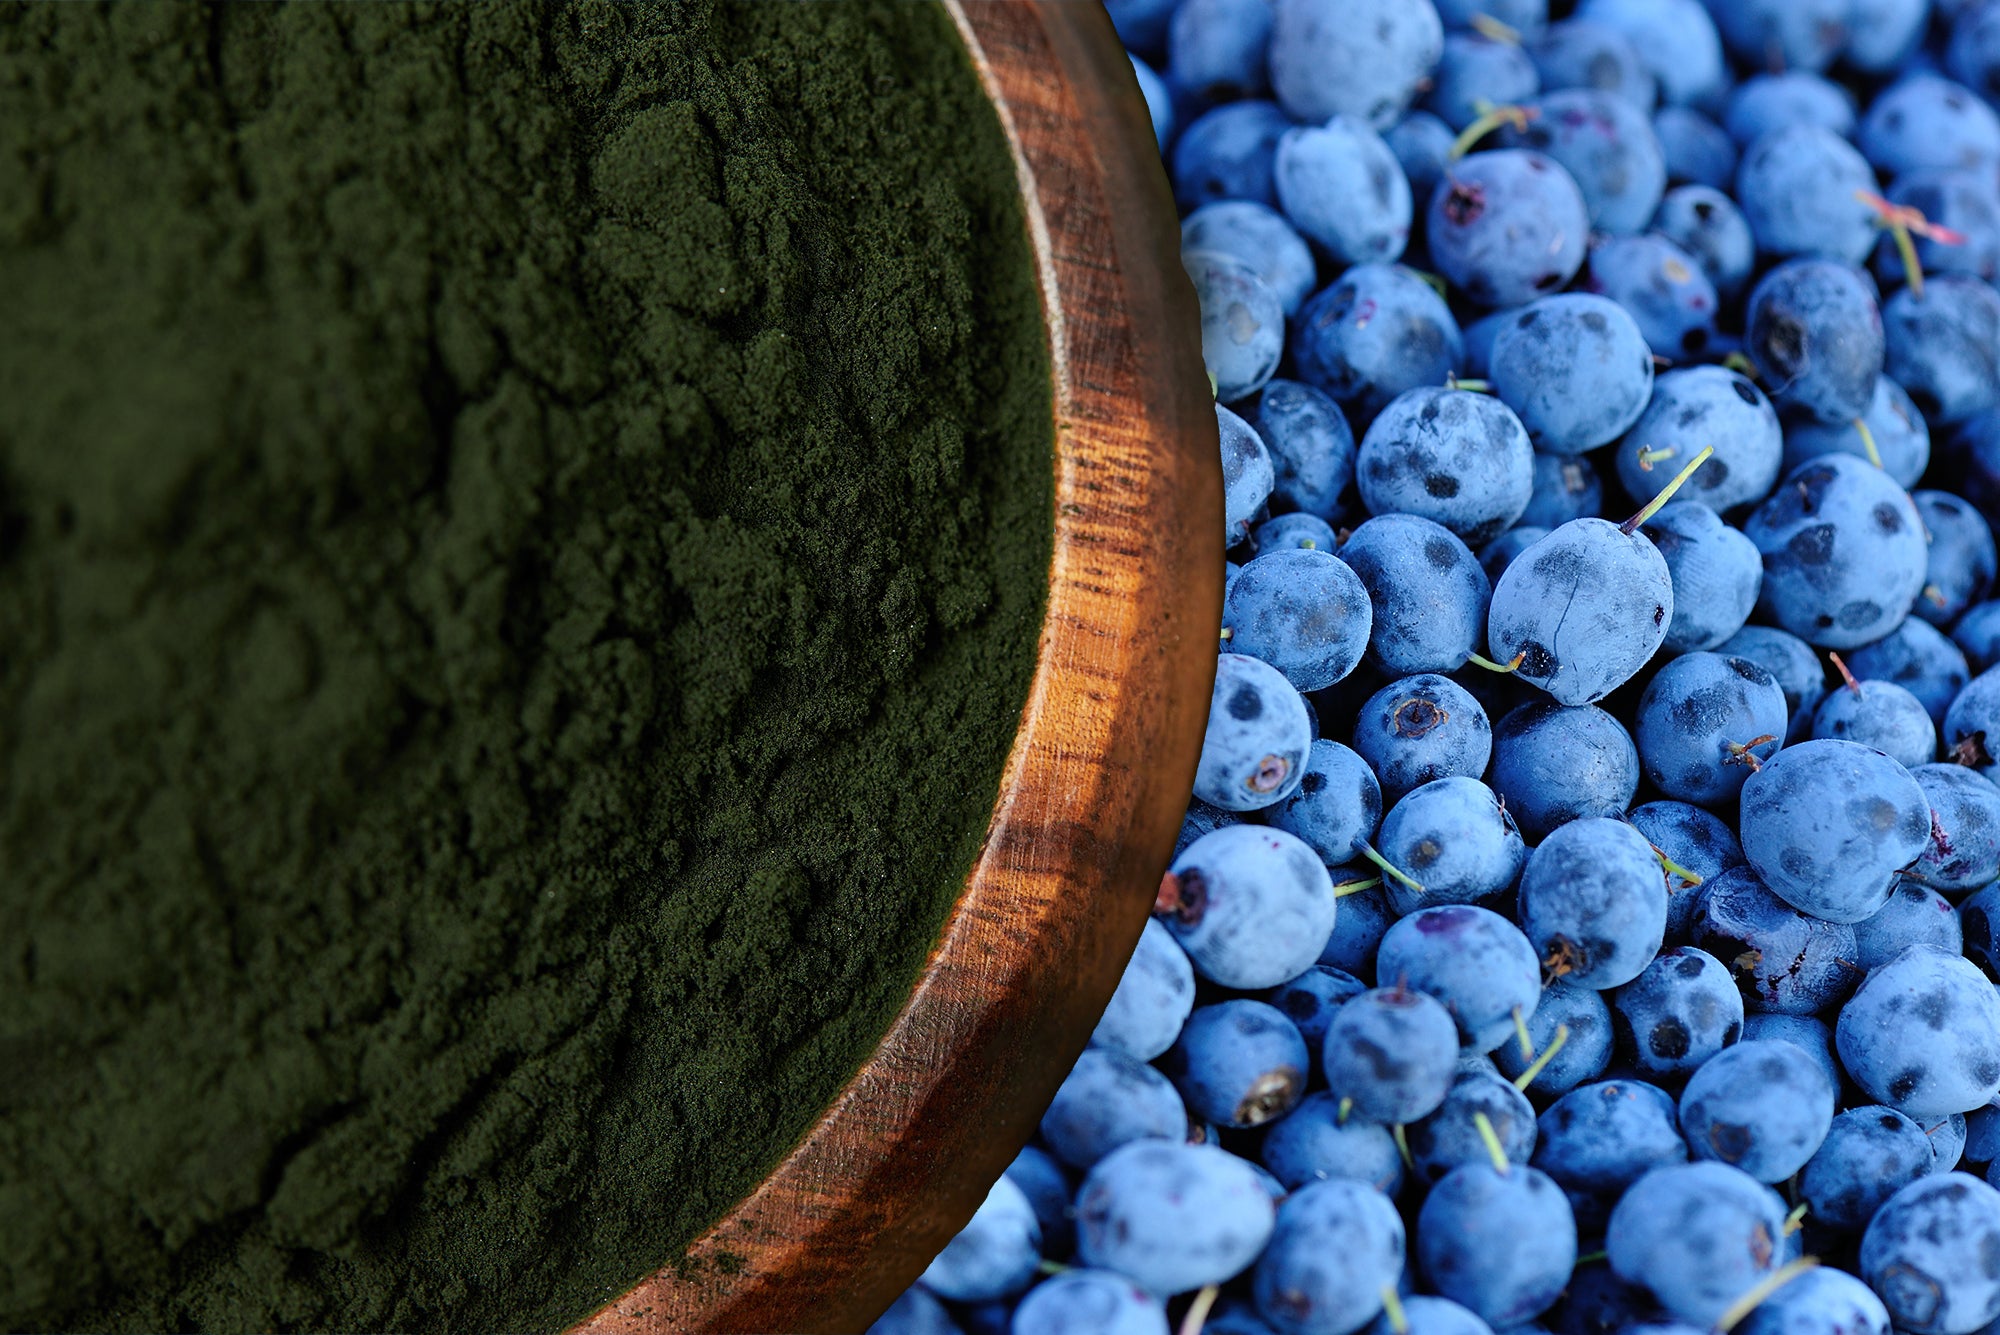 Antioxidant Replenishment: Boost Your Body's Defenses with Vimergy's Wild Blueberry and Spirulina Powders